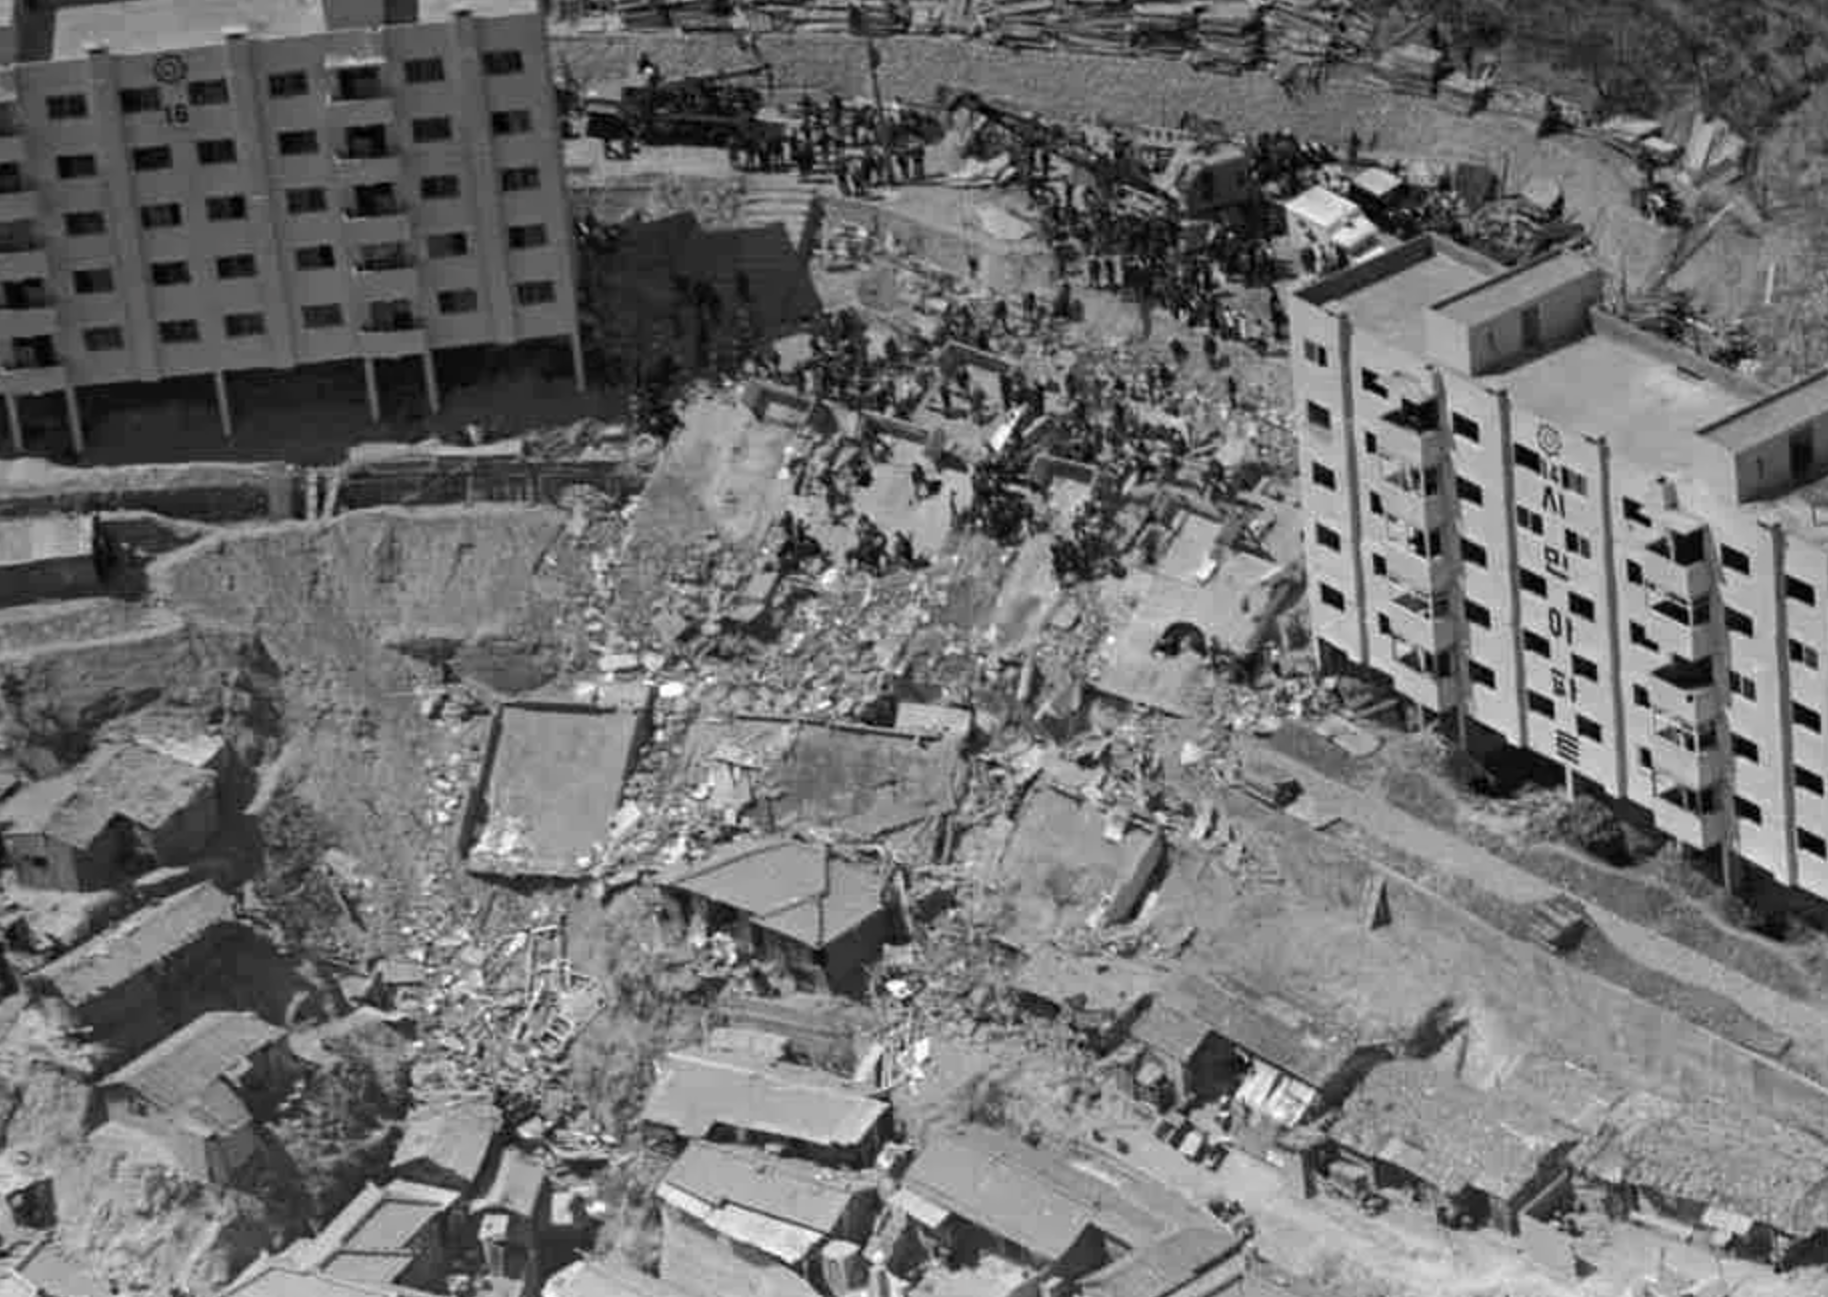 34 people were killed and 40 injured when an apartment building in Seoul, Korea collapsed shortly after its completion. An investigation into the complex found that several shortcuts were taken during construction, including one column that was supposed to have 70 steel support beams featuring just five. 